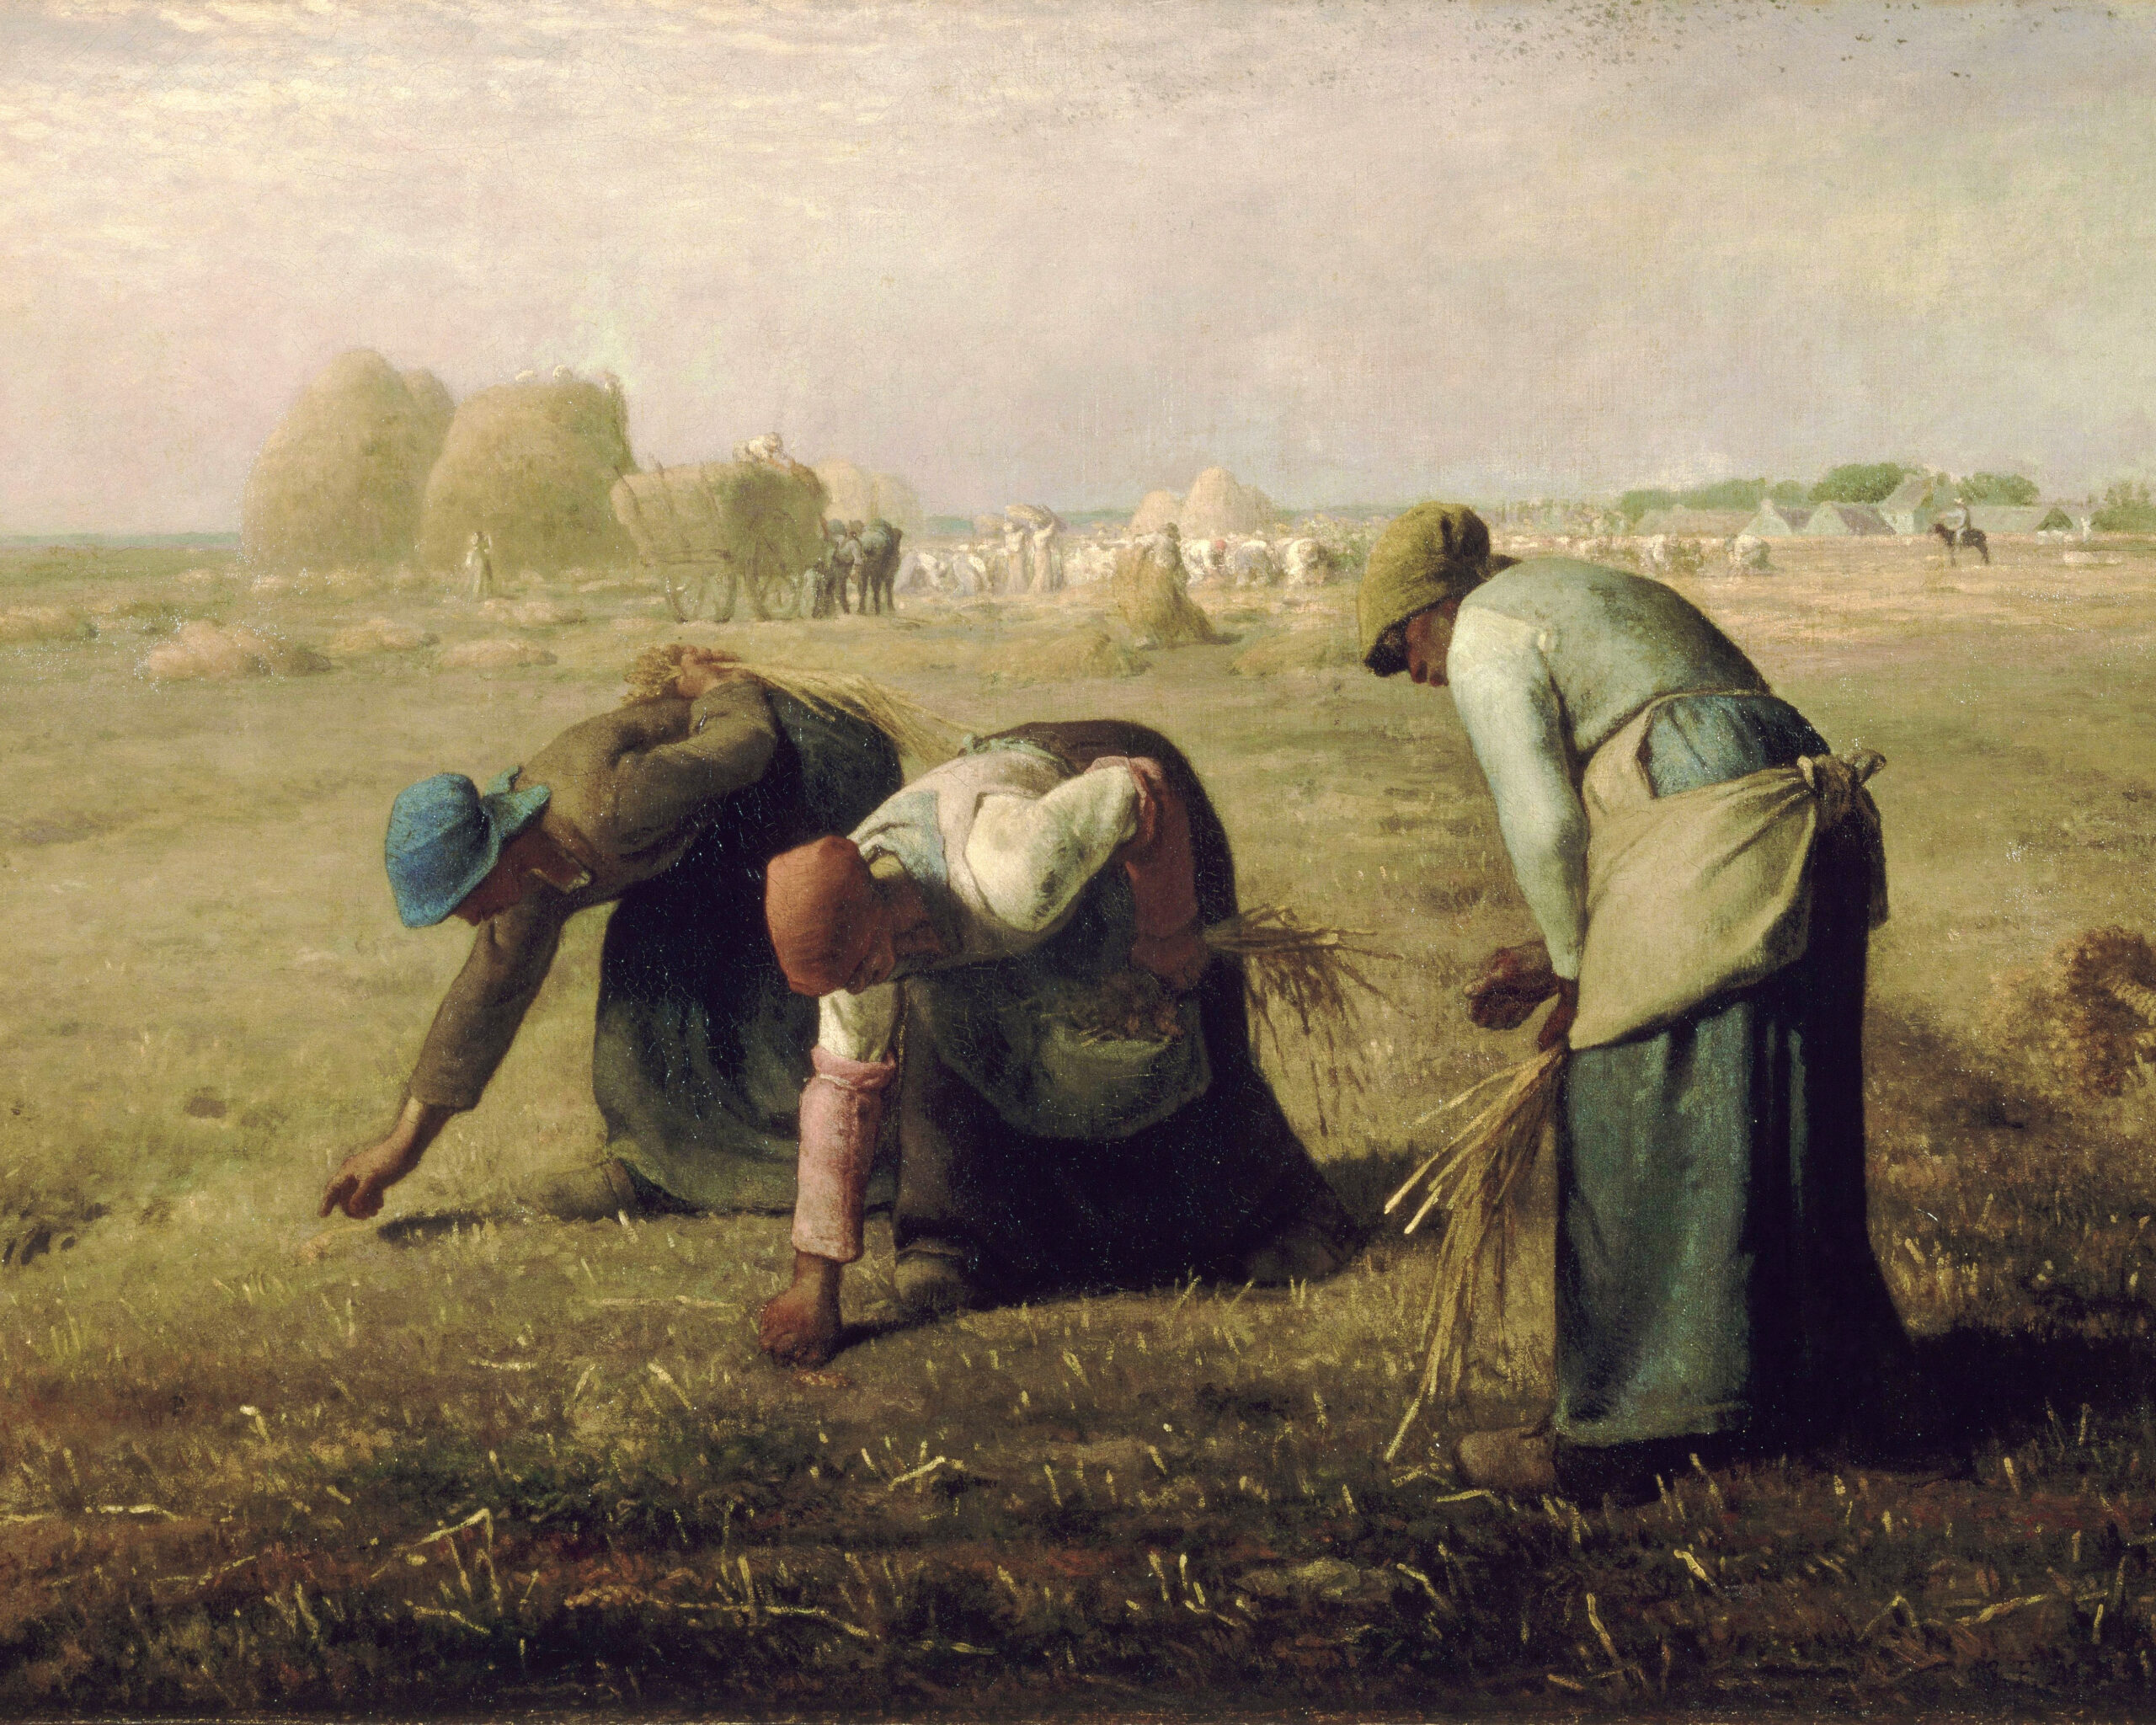 Jean-François Millet, The Gleaners, 1857 (Wikimedia Commons)